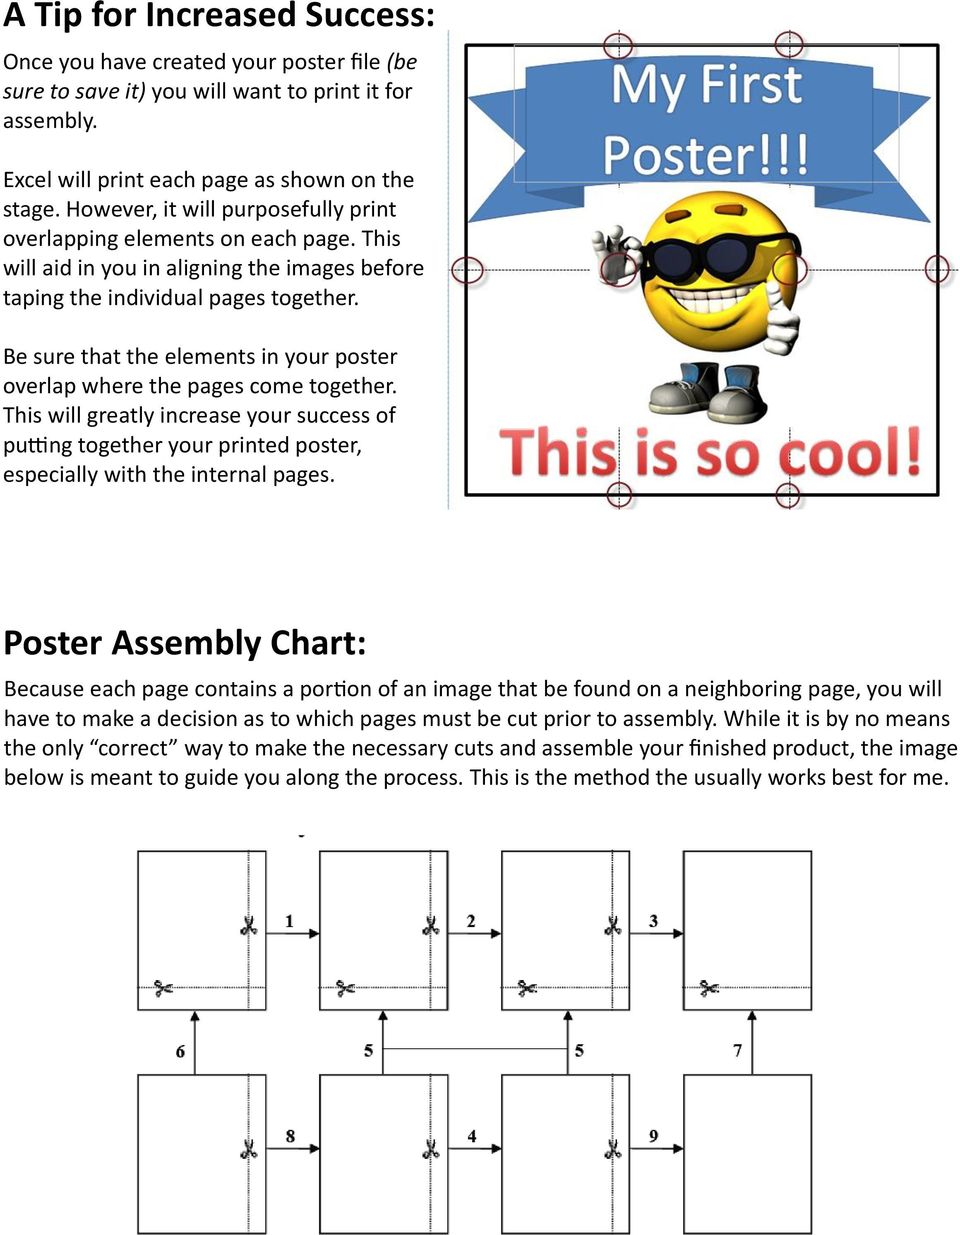 Be sure that the elements in your poster overlap where the pages come together. This will greatly increase your success of putting together your printed poster, especially with the internal pages.